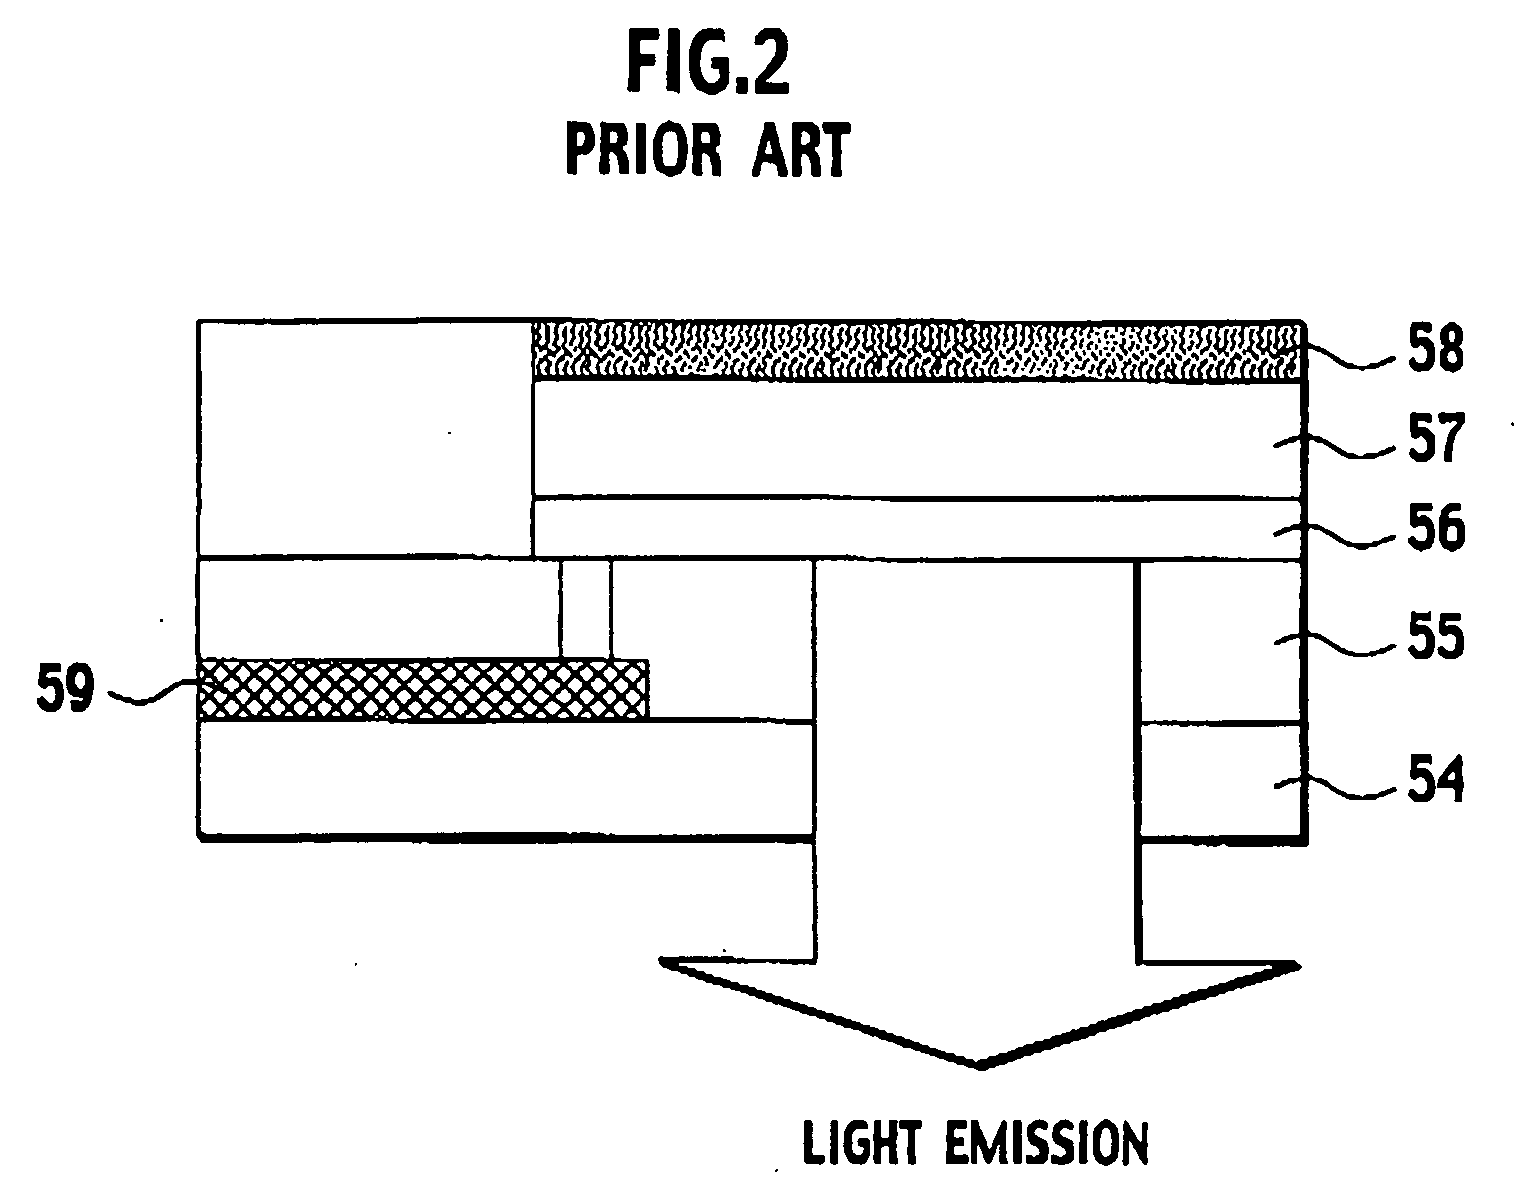 Display with multiple emission layers